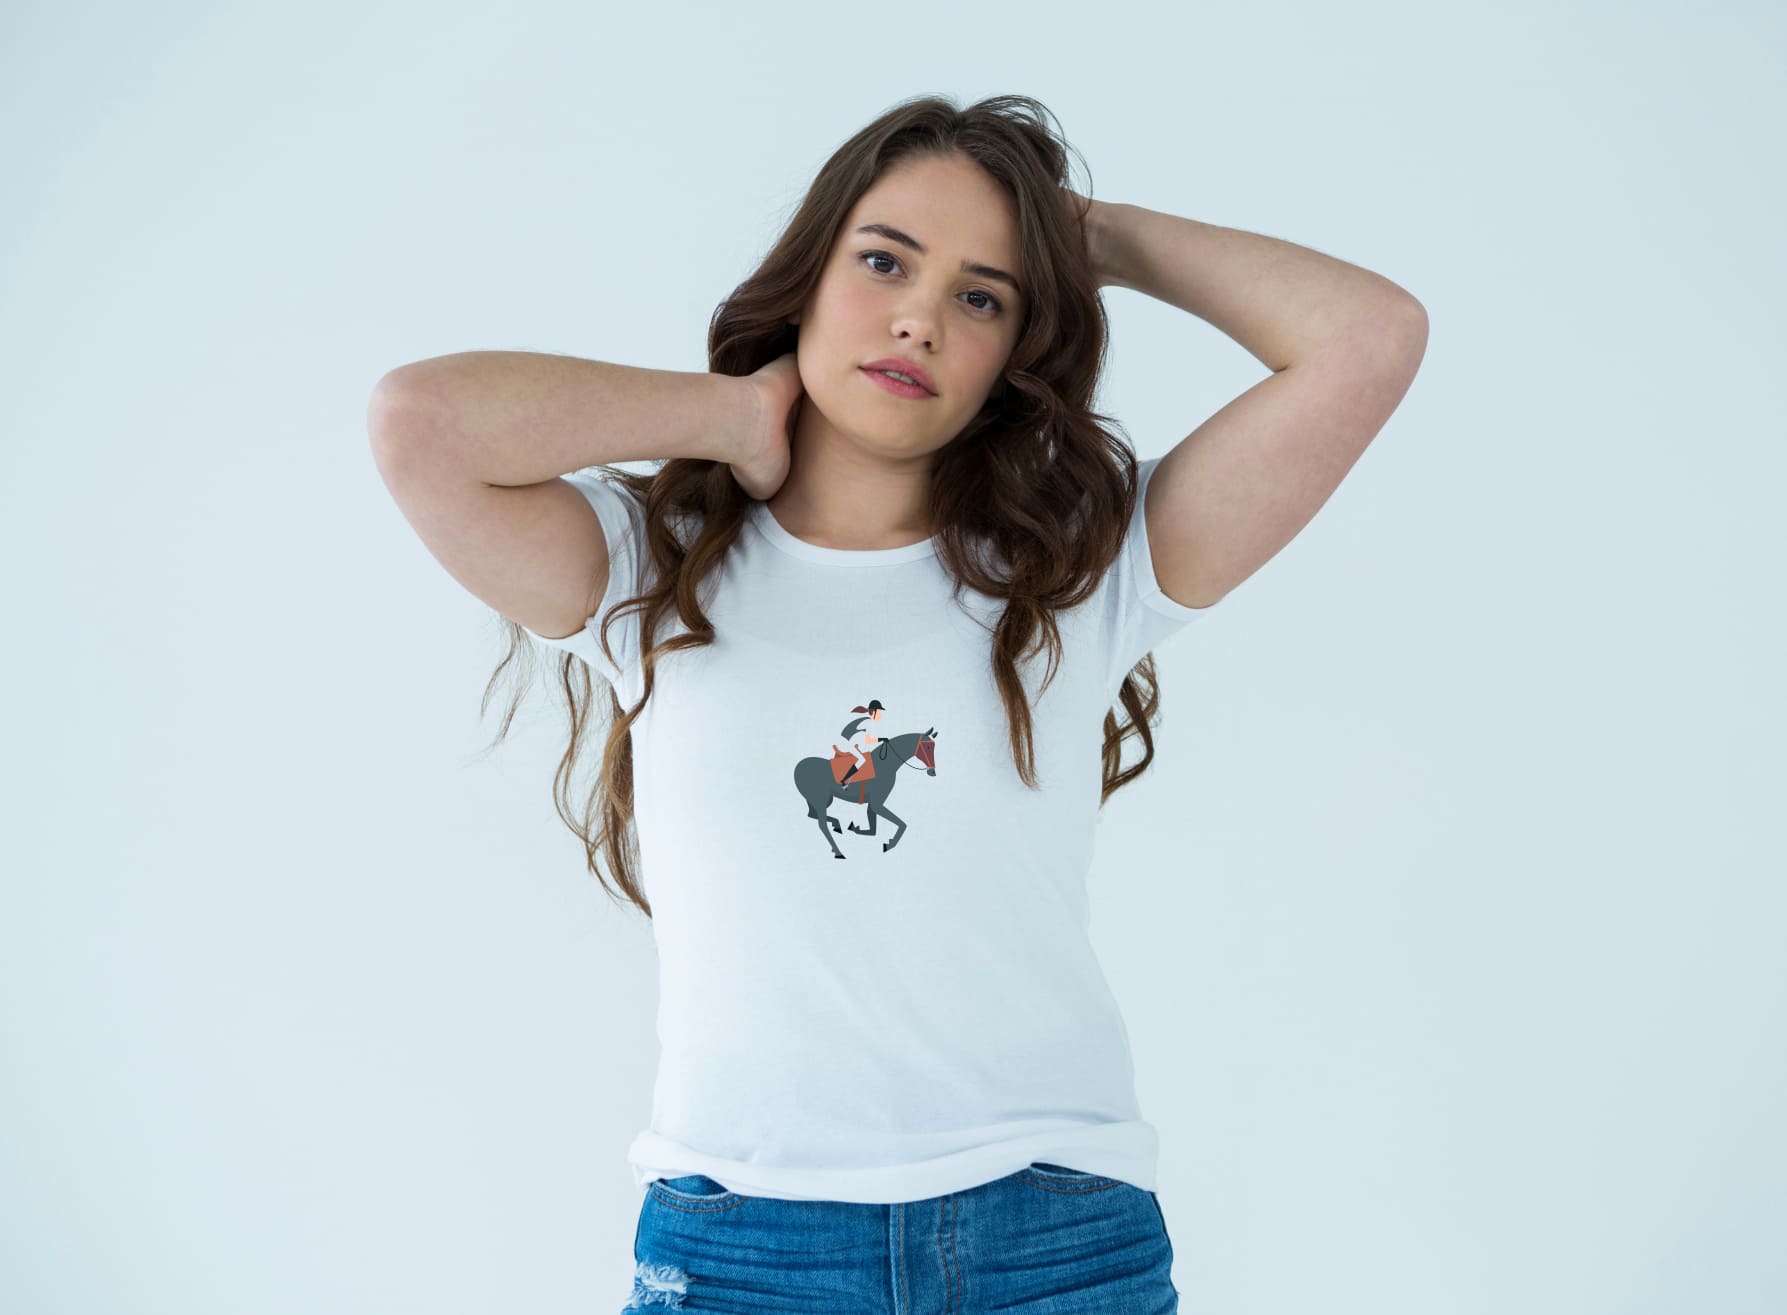 White t-shirt with an image of a gray horse riding, on a girl on a light blue background.